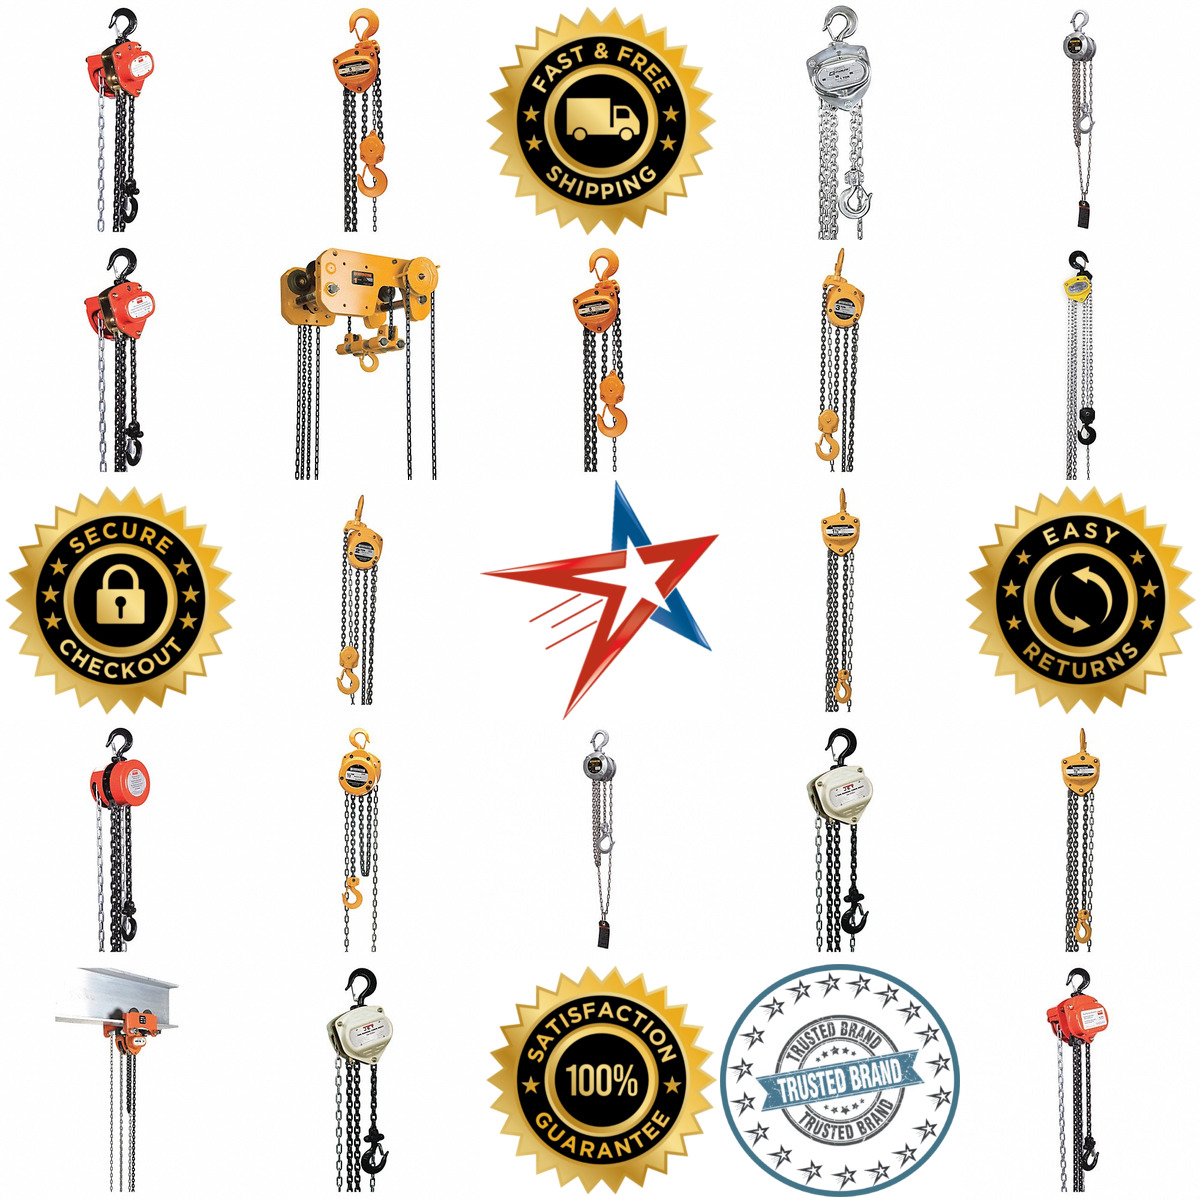 A selection of Manual Chain Hoists products on GoVets